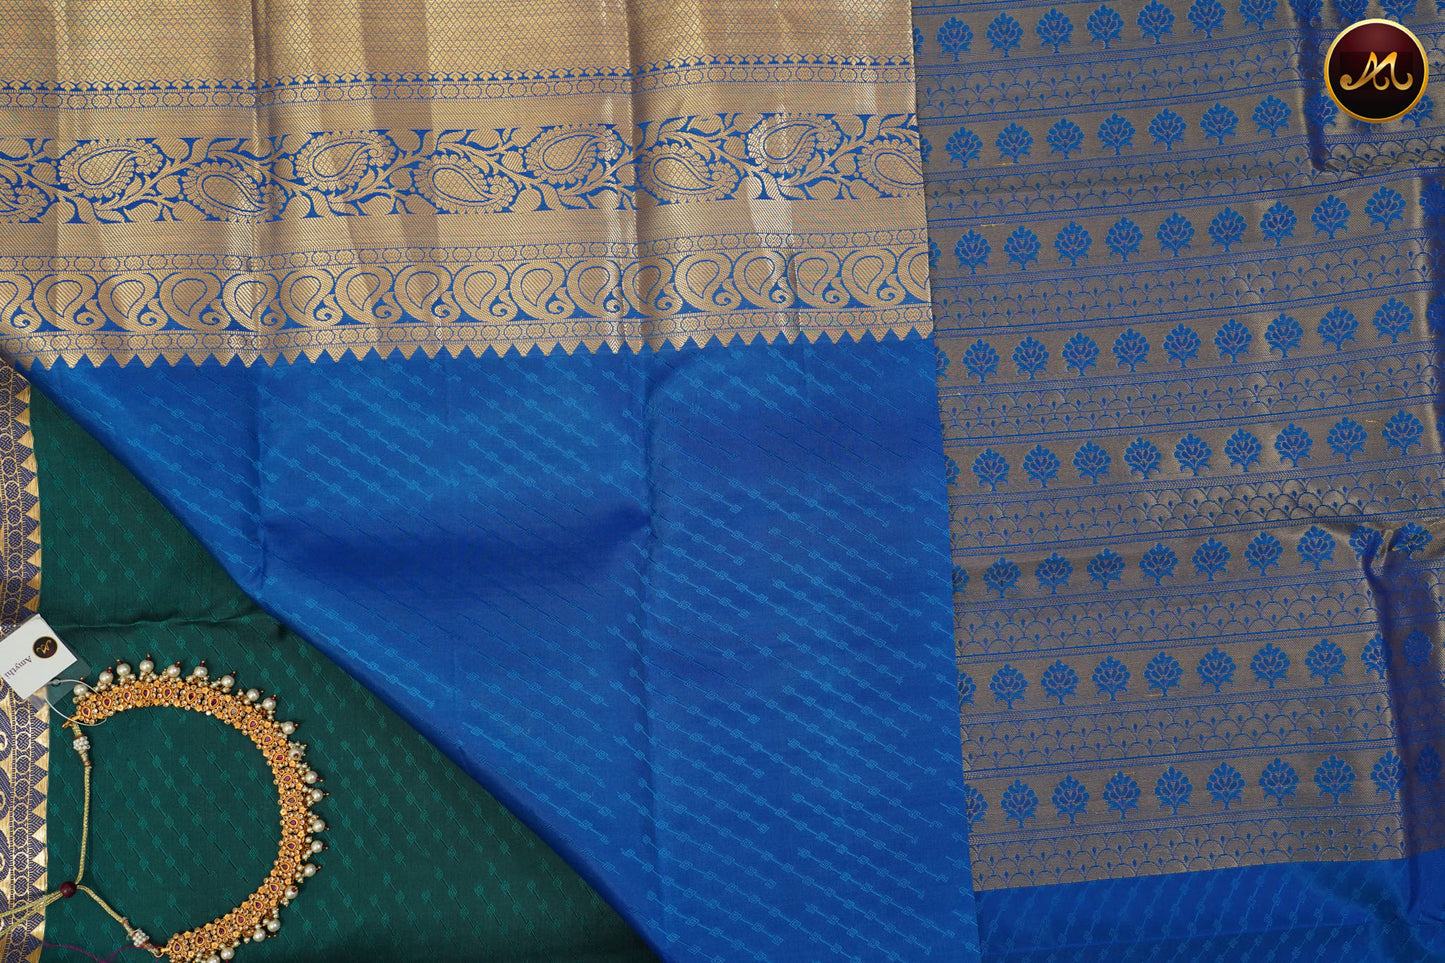 Kanchivaram Semi Silk  Saree in Dark blue and navy blue combination with emboss and motif work and Kanchi border